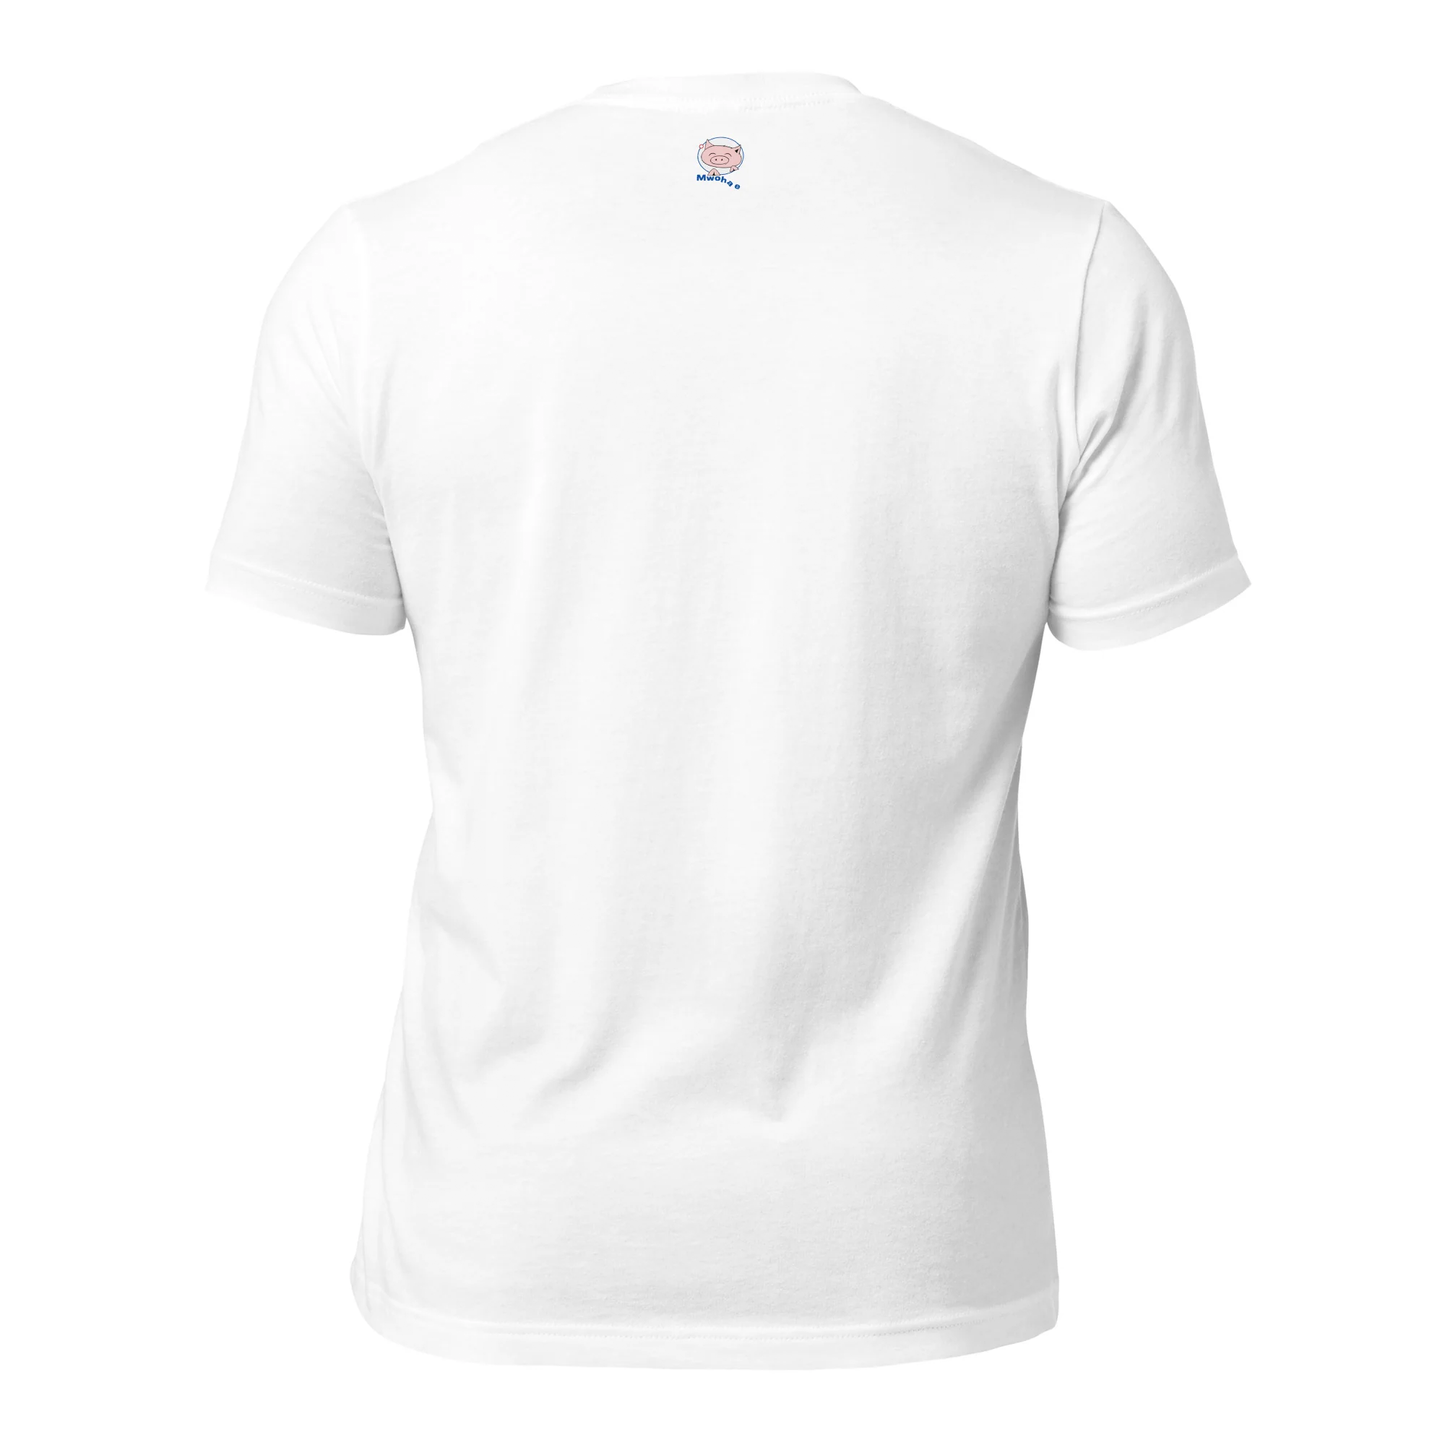 White T-shirt with small Mwohae logo on the back